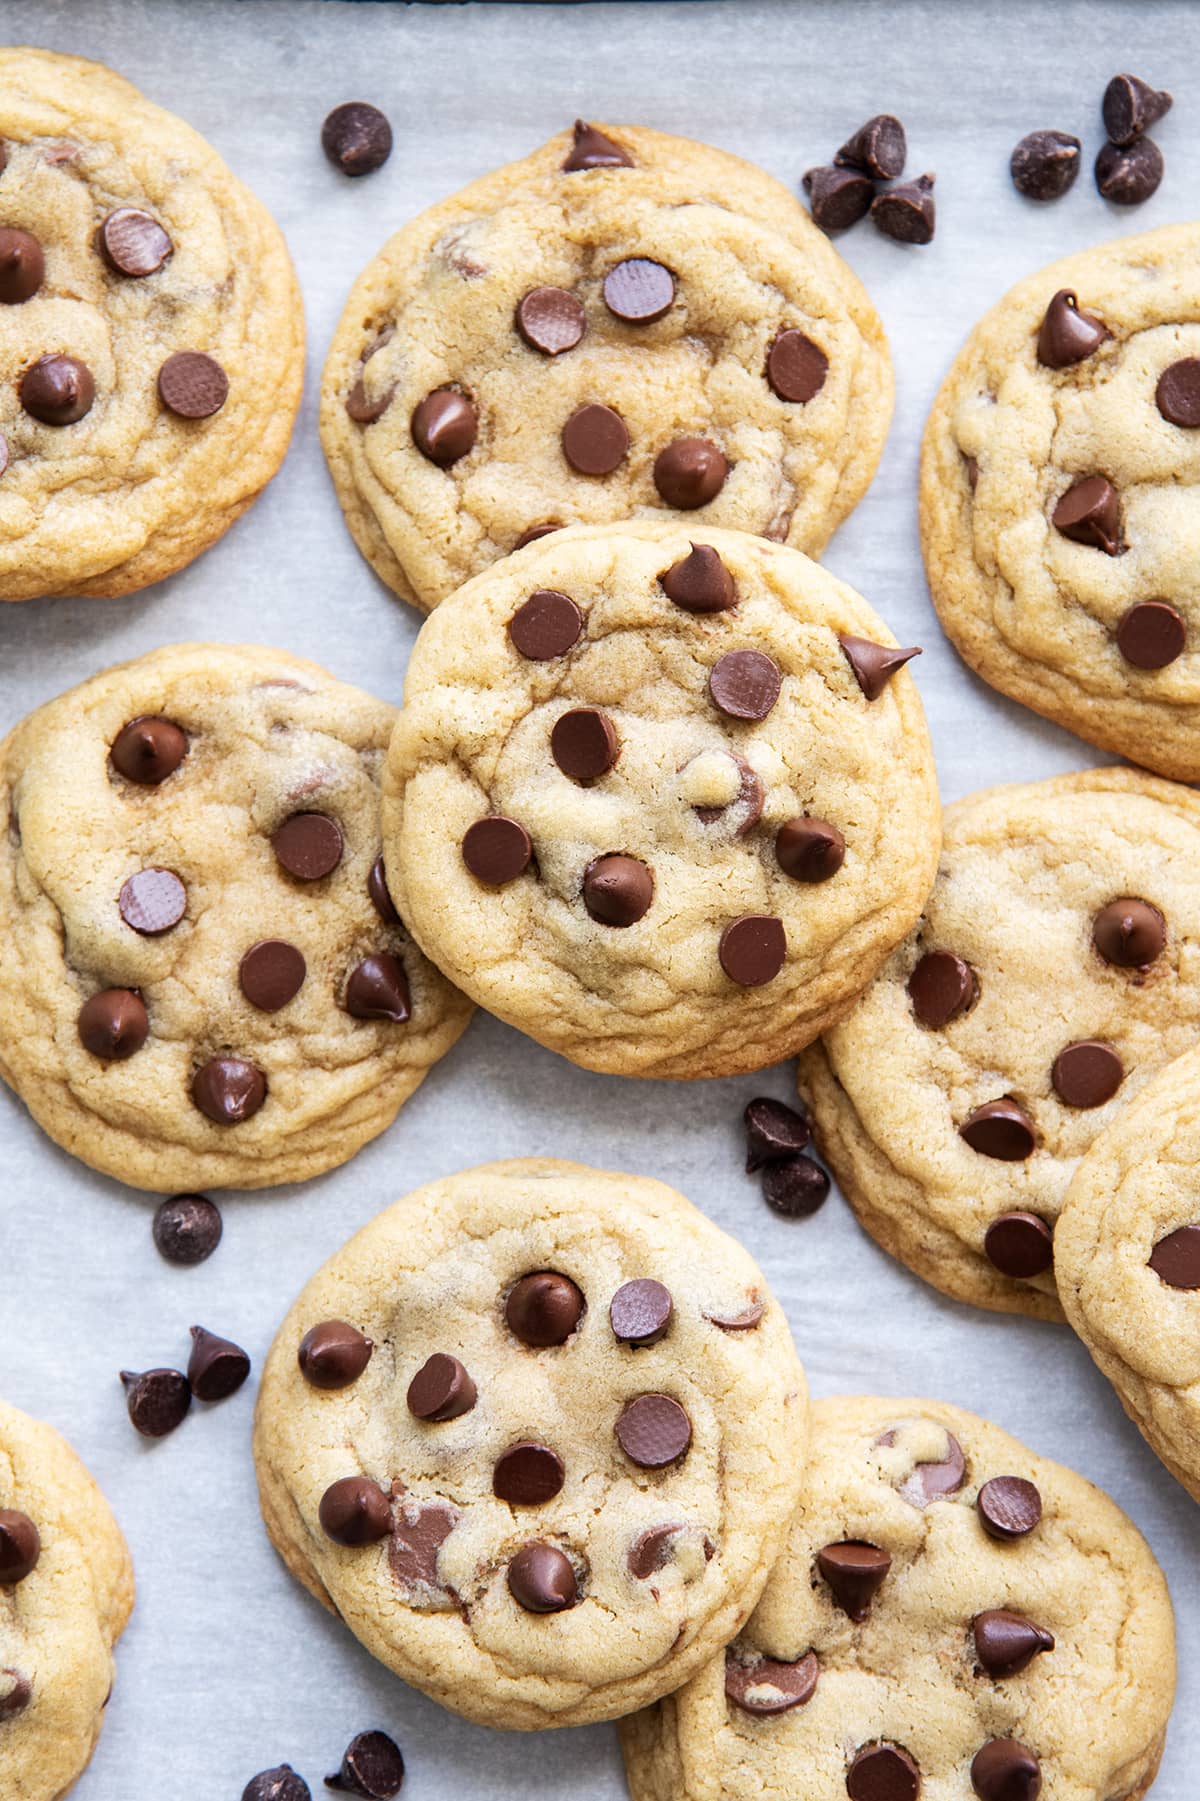 Chocolate chip cookies on a piece of parchment paper.